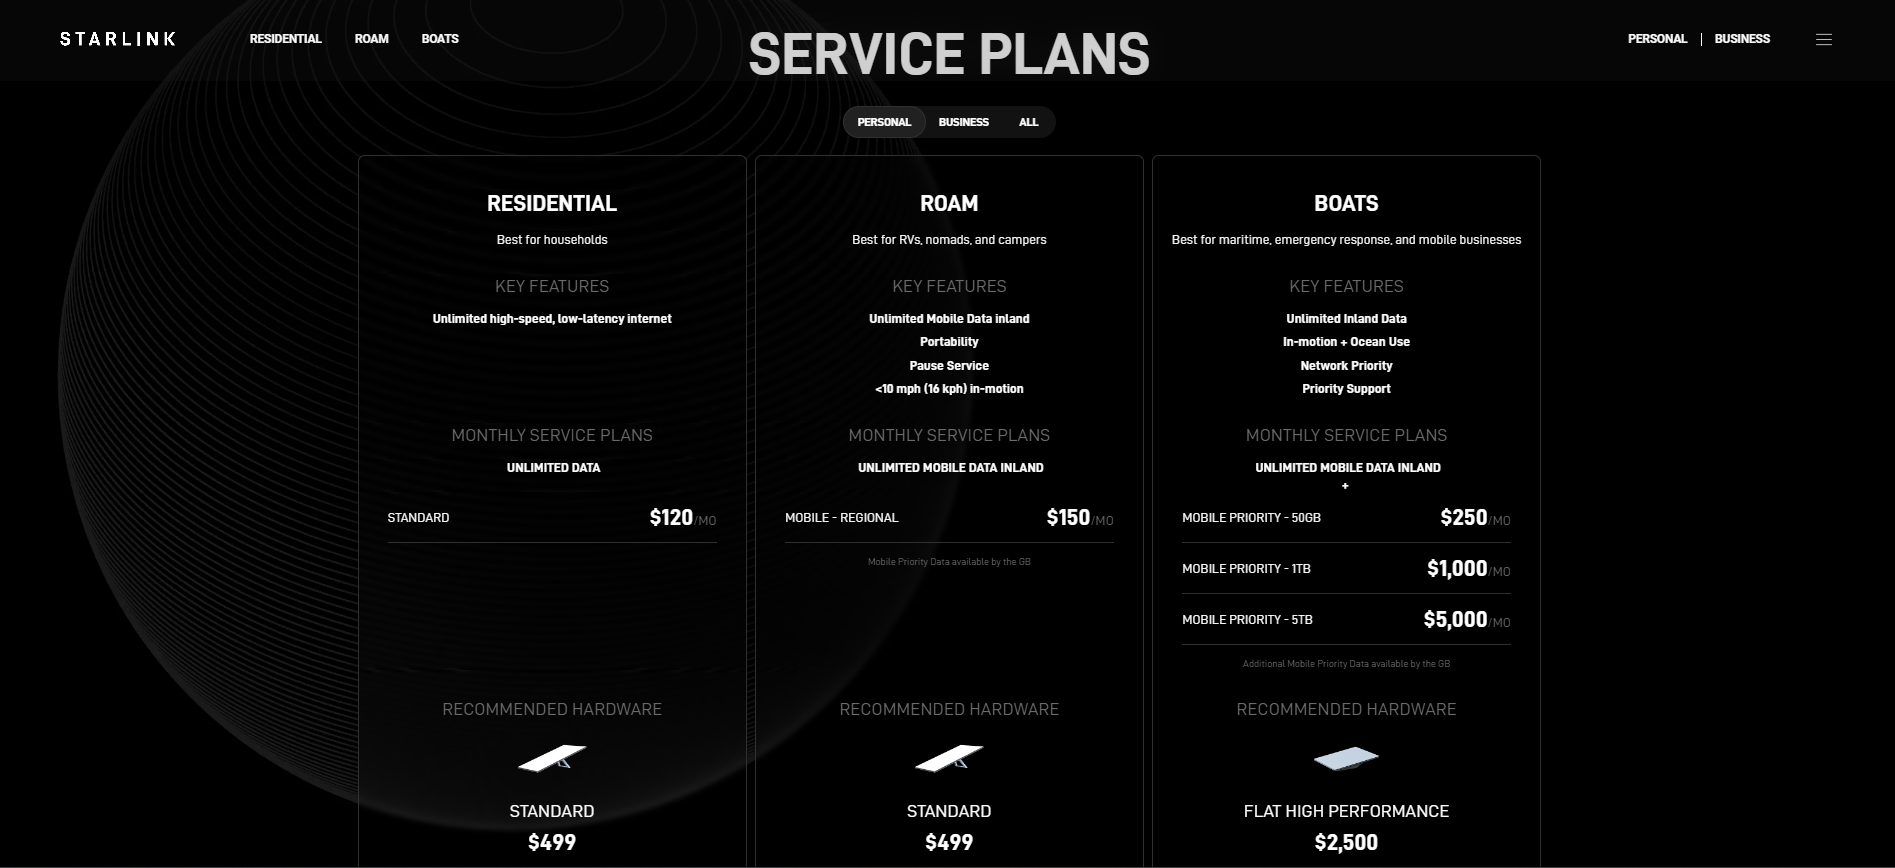 Starlink service plans with equipment costs.